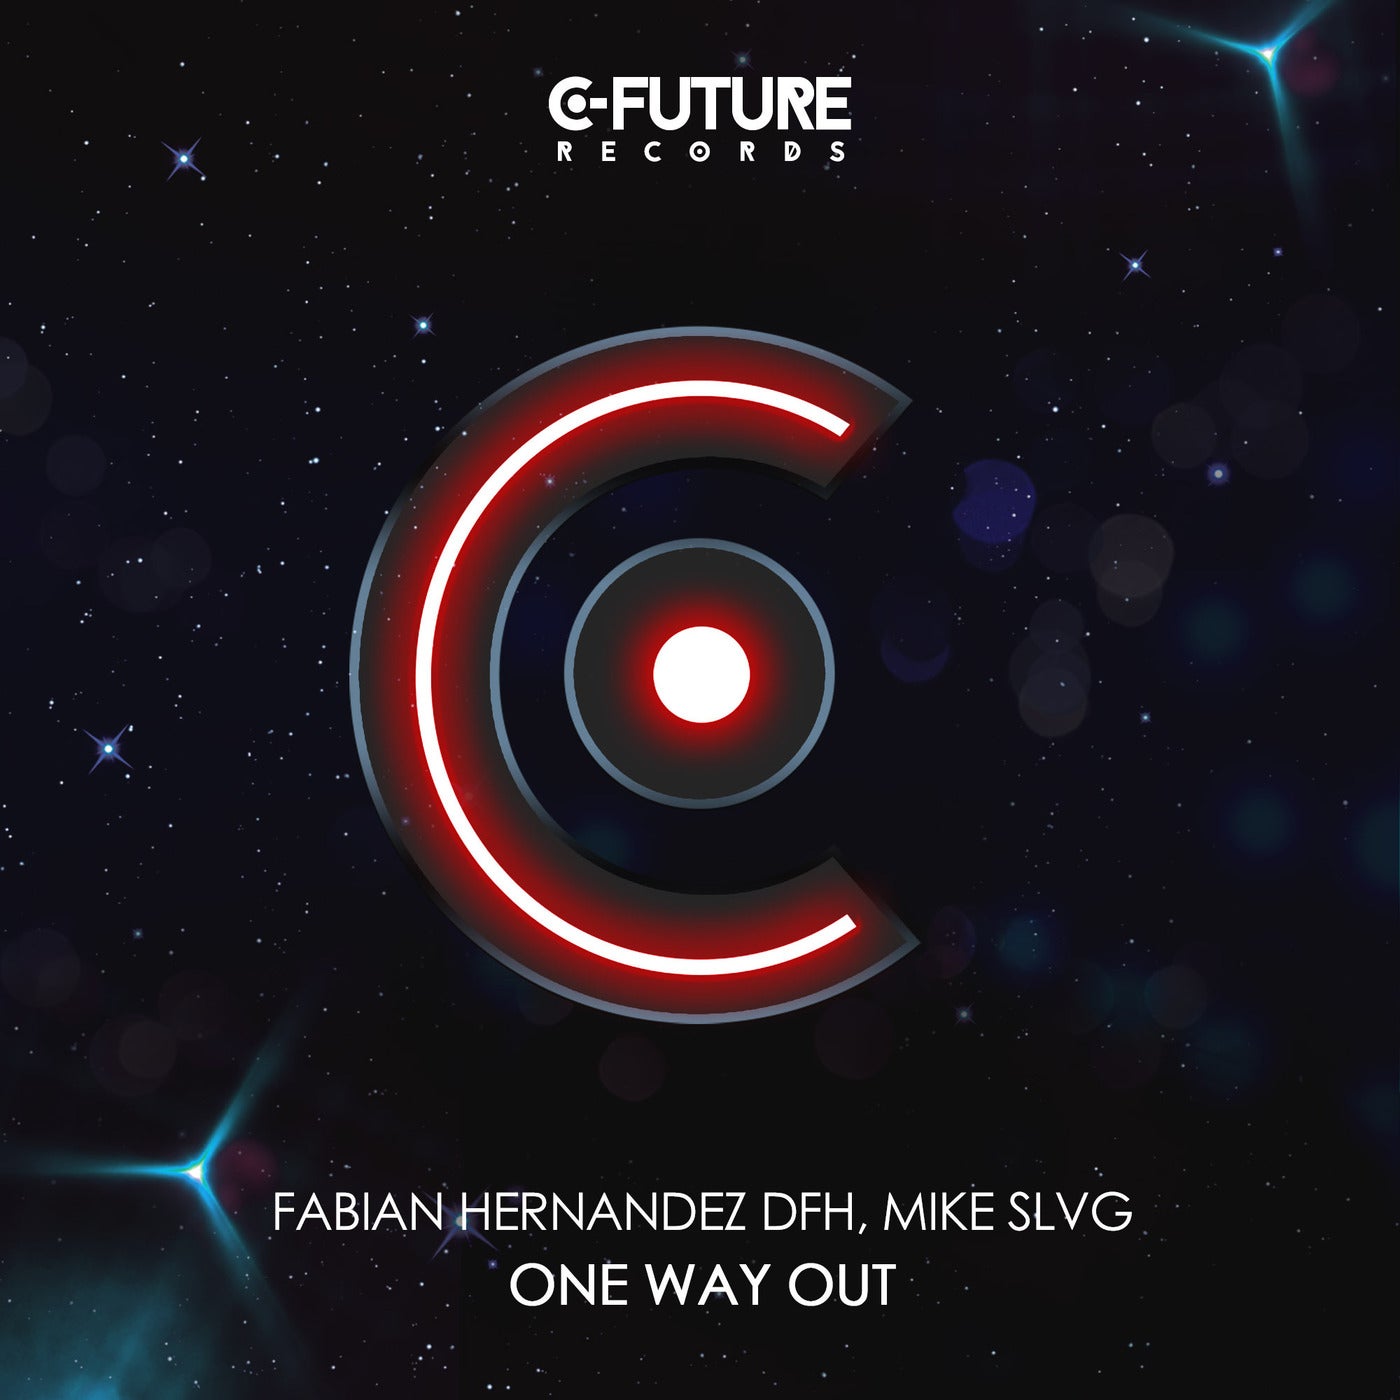 Mike Slvg, Fabian Hernandez Dfh - One Way Out - Extended Mix [CF2107DJ]